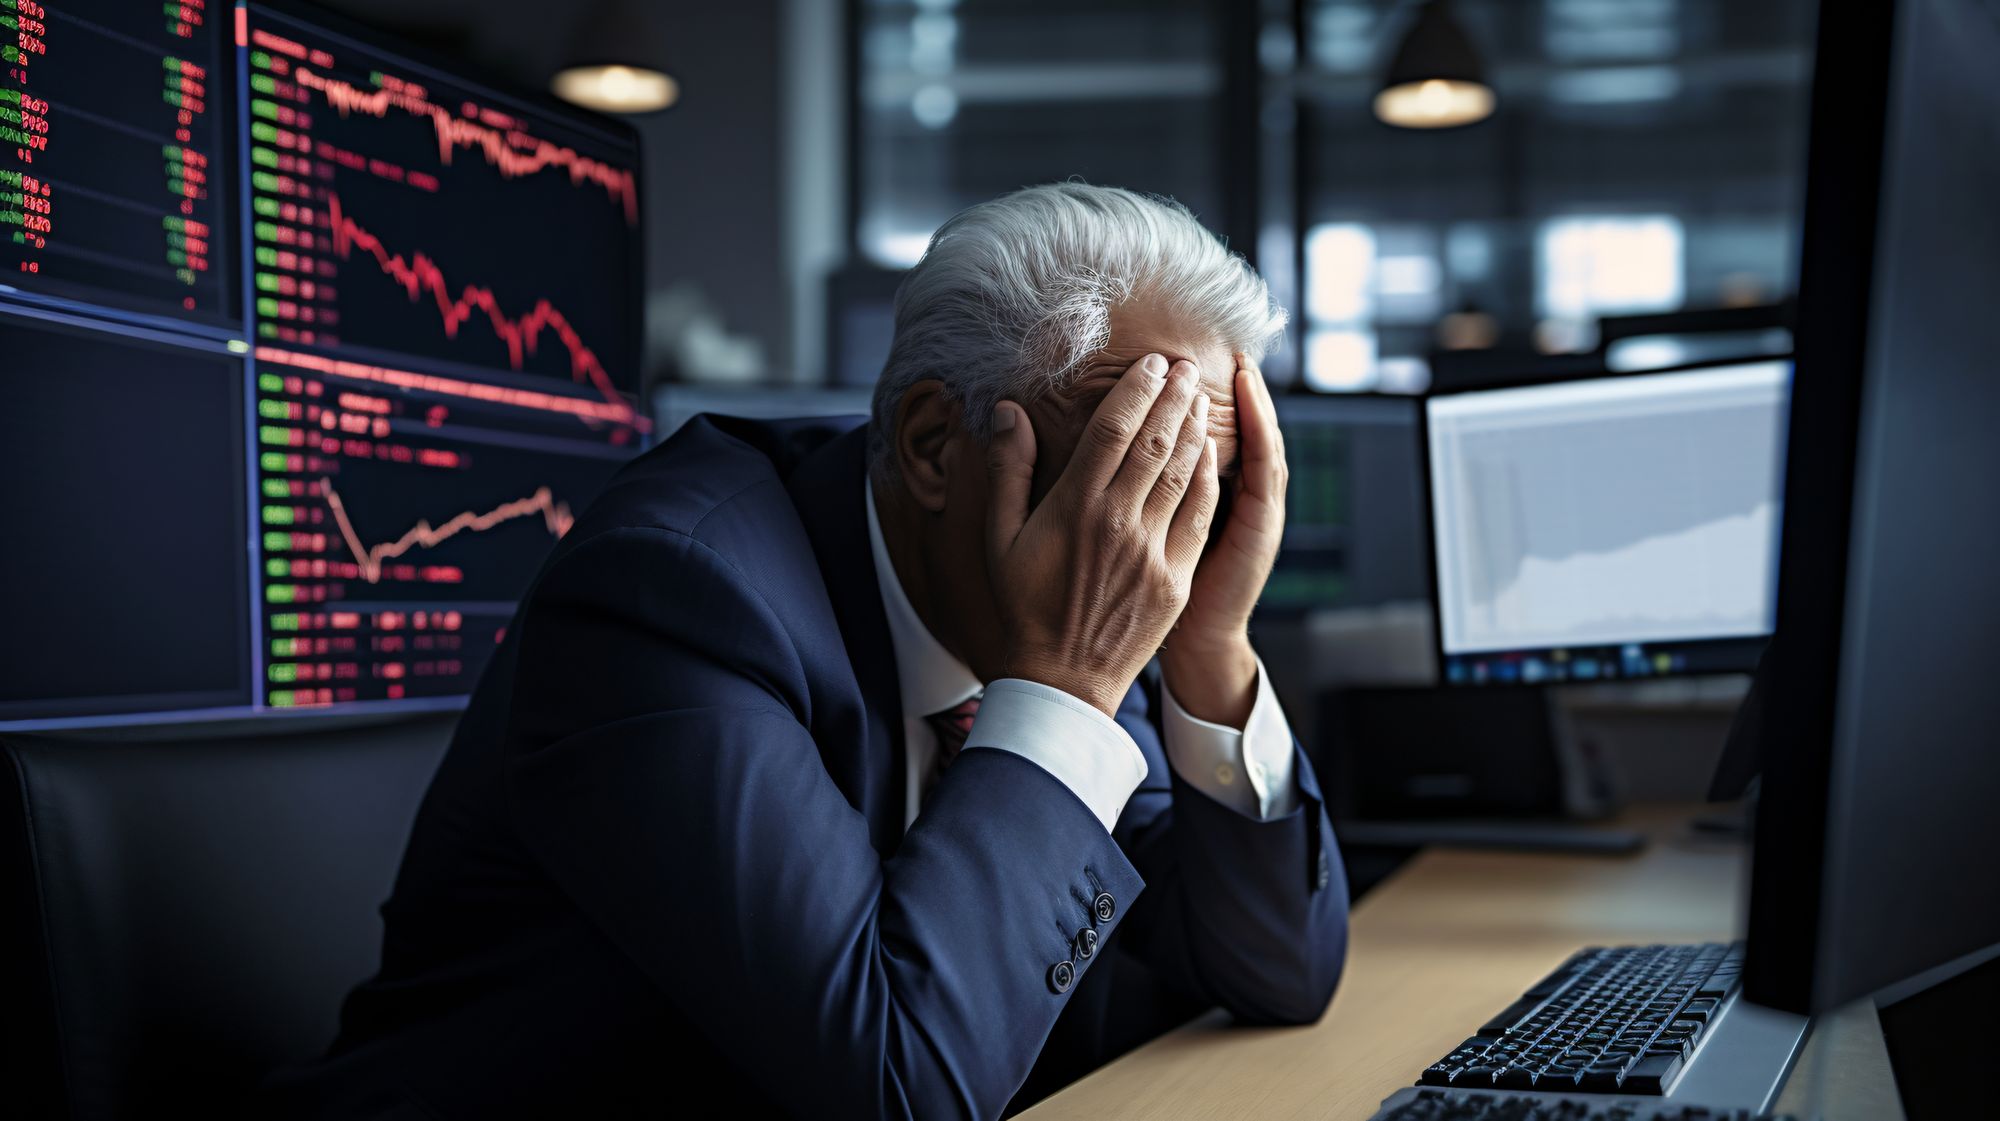 Timing the Market: The Pitfalls of Trying to Predict Stock Movements